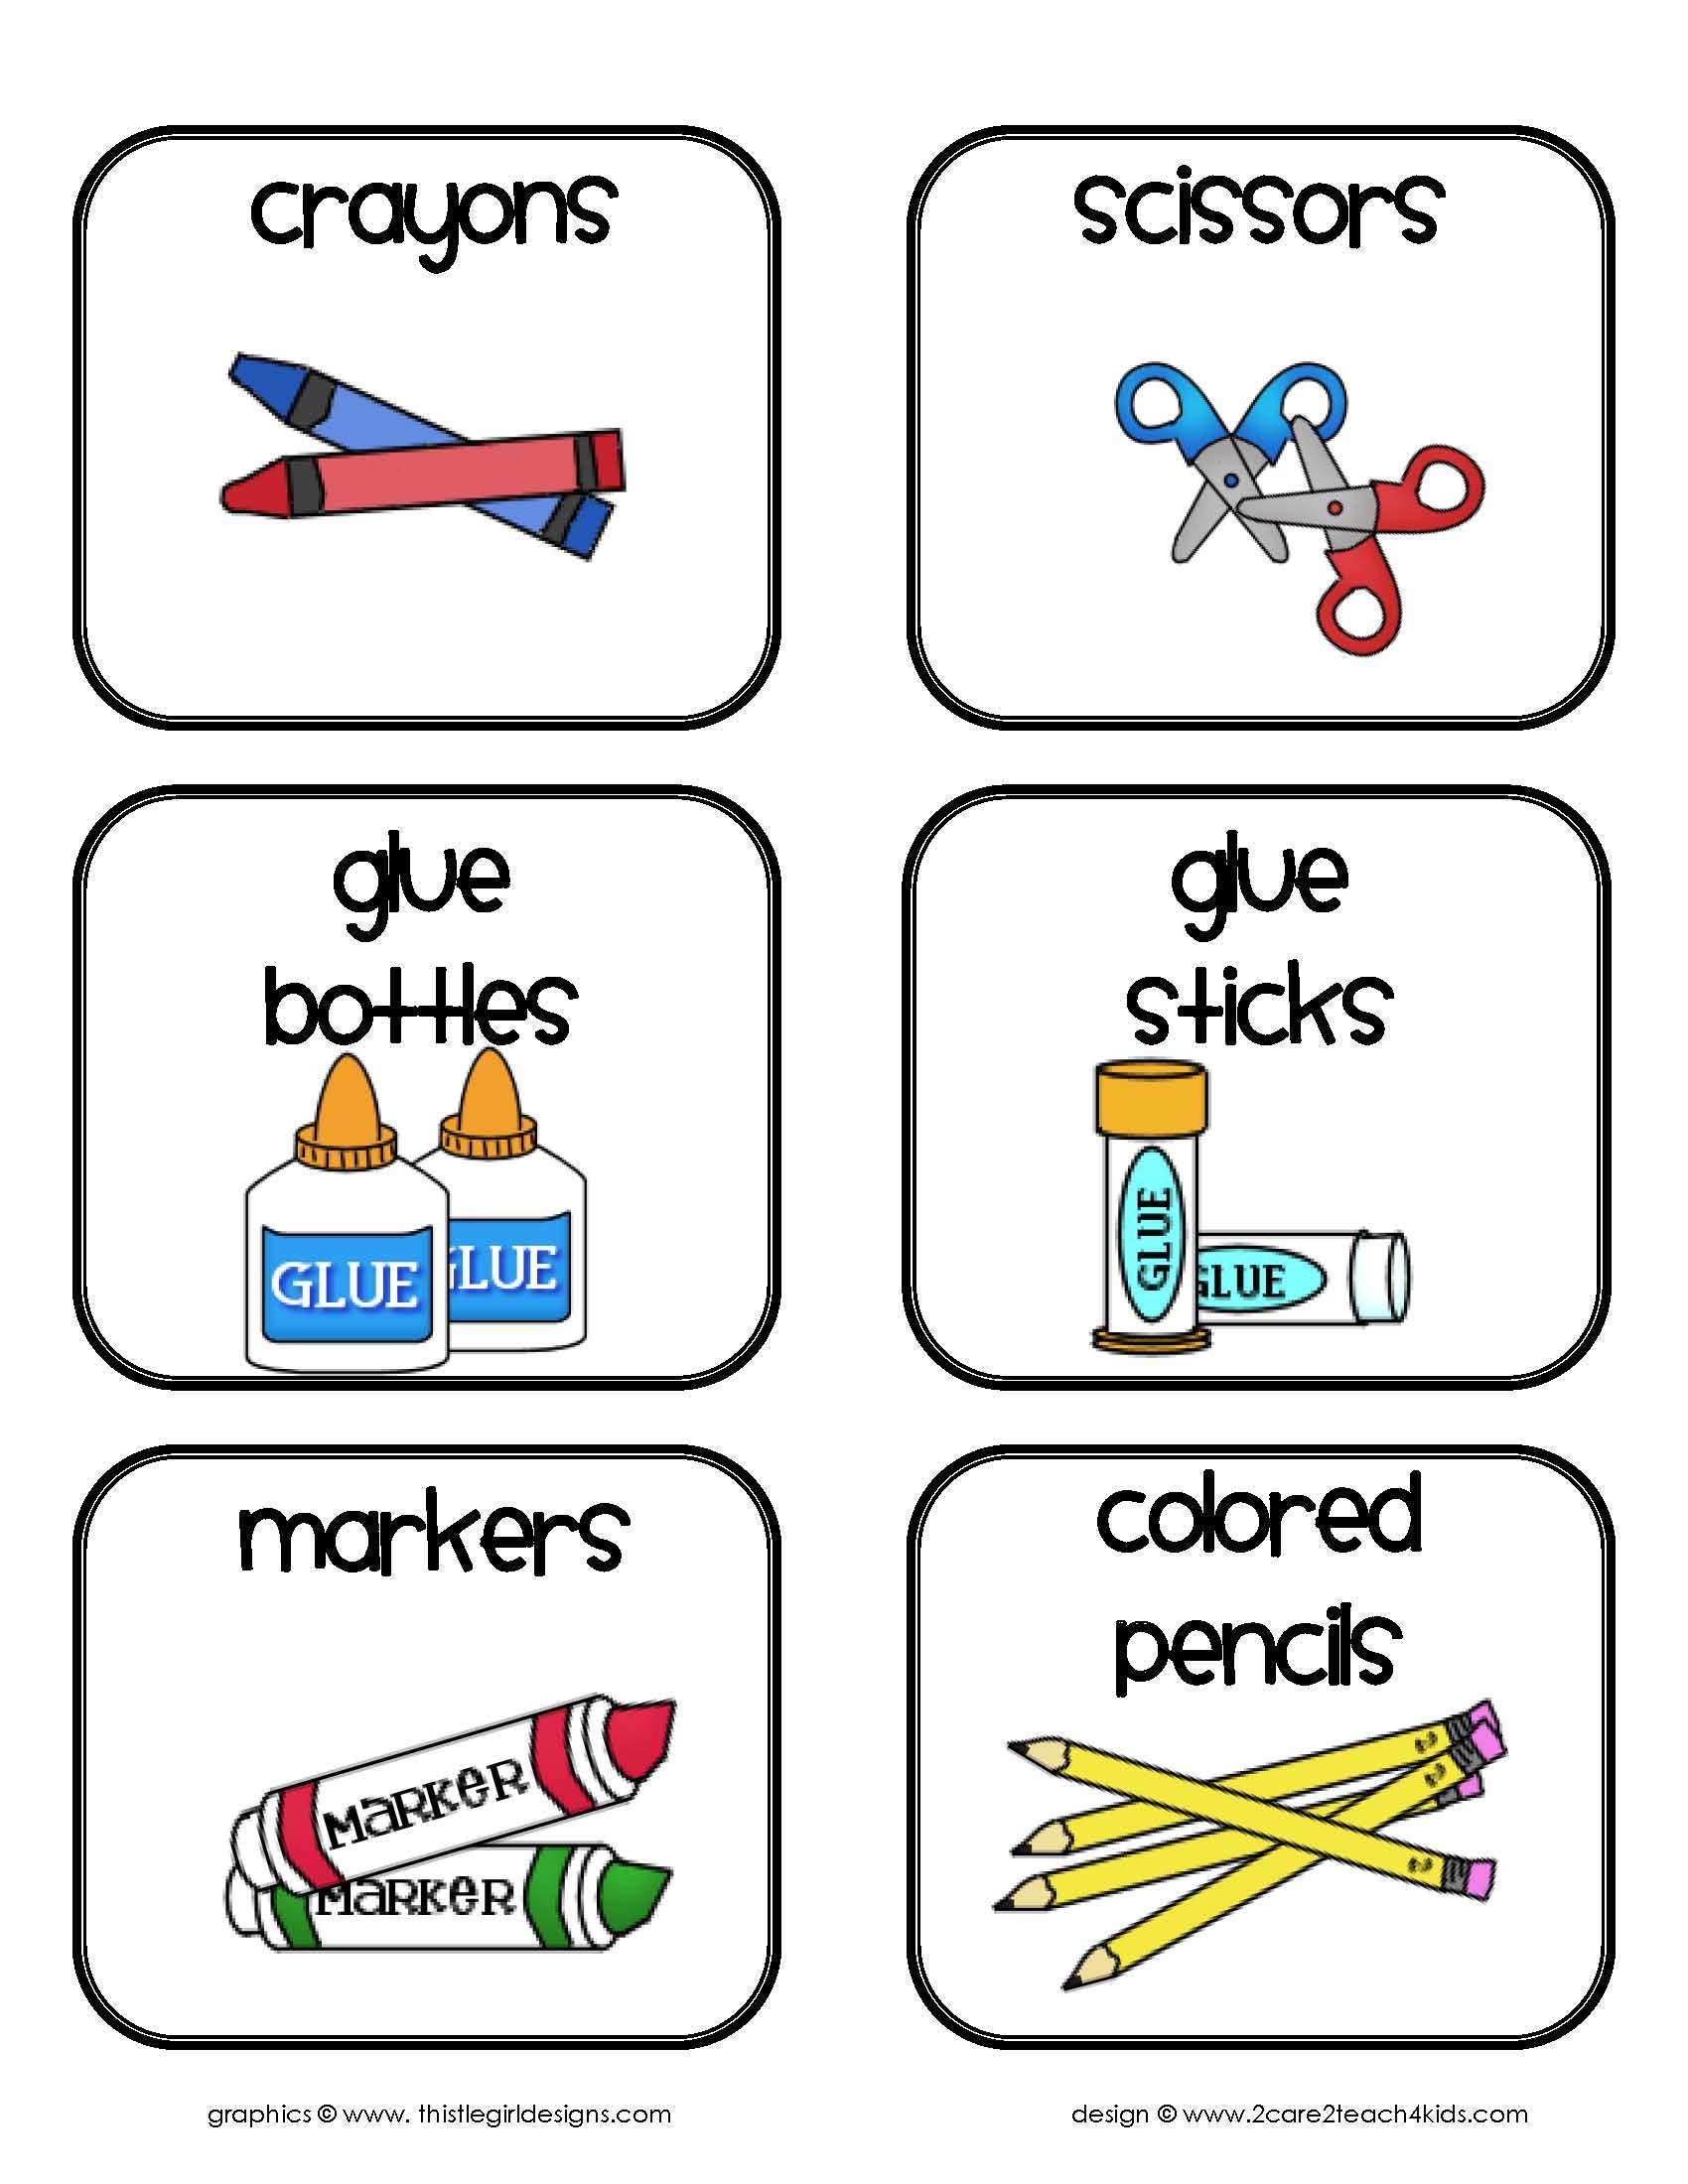 Free Printable Classroom Signs And Labels (85+ Images In Collection - Free Printable Classroom Labels With Pictures